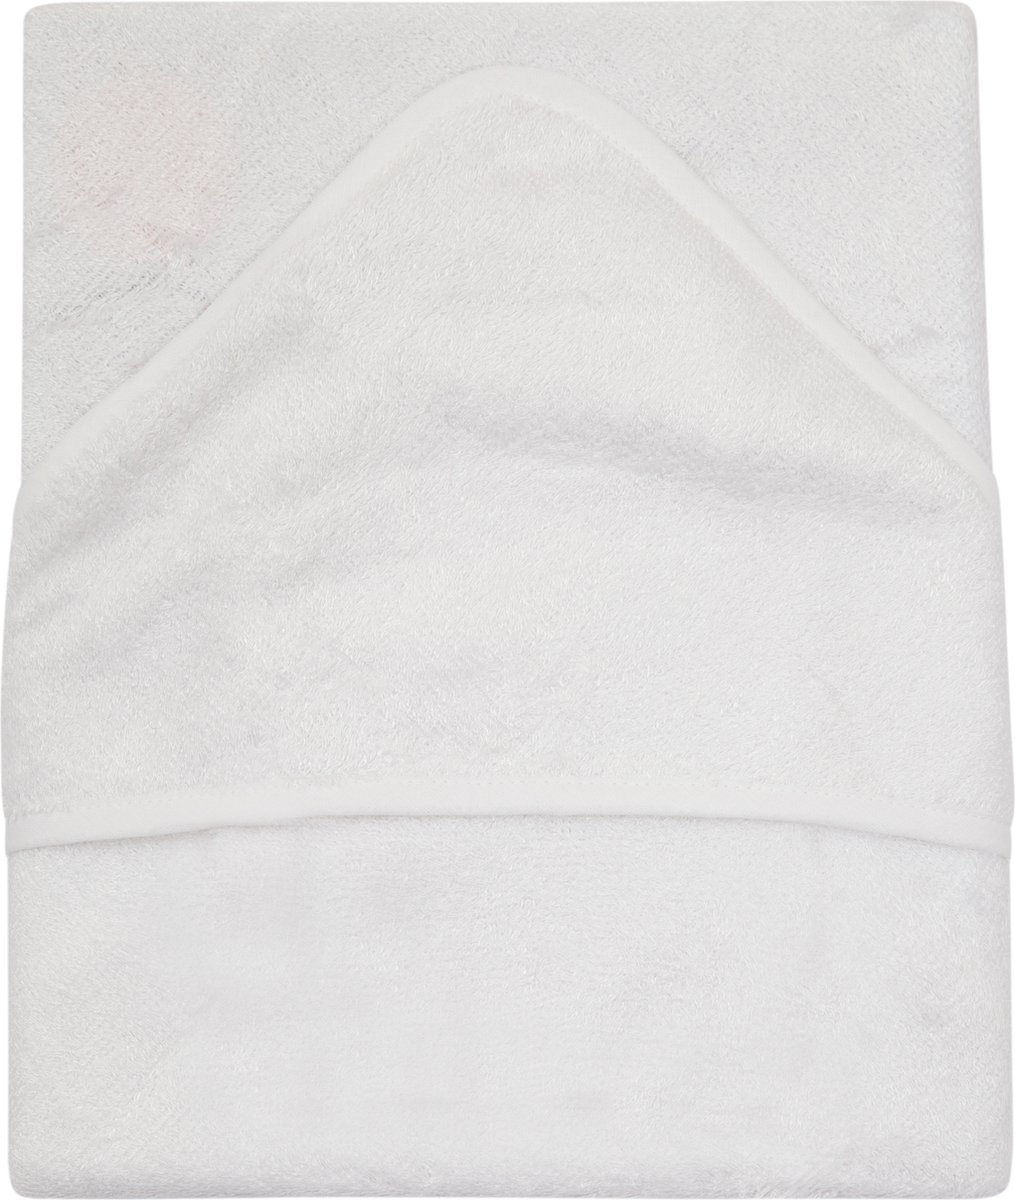 Timboo badcape - hooded towel Wit